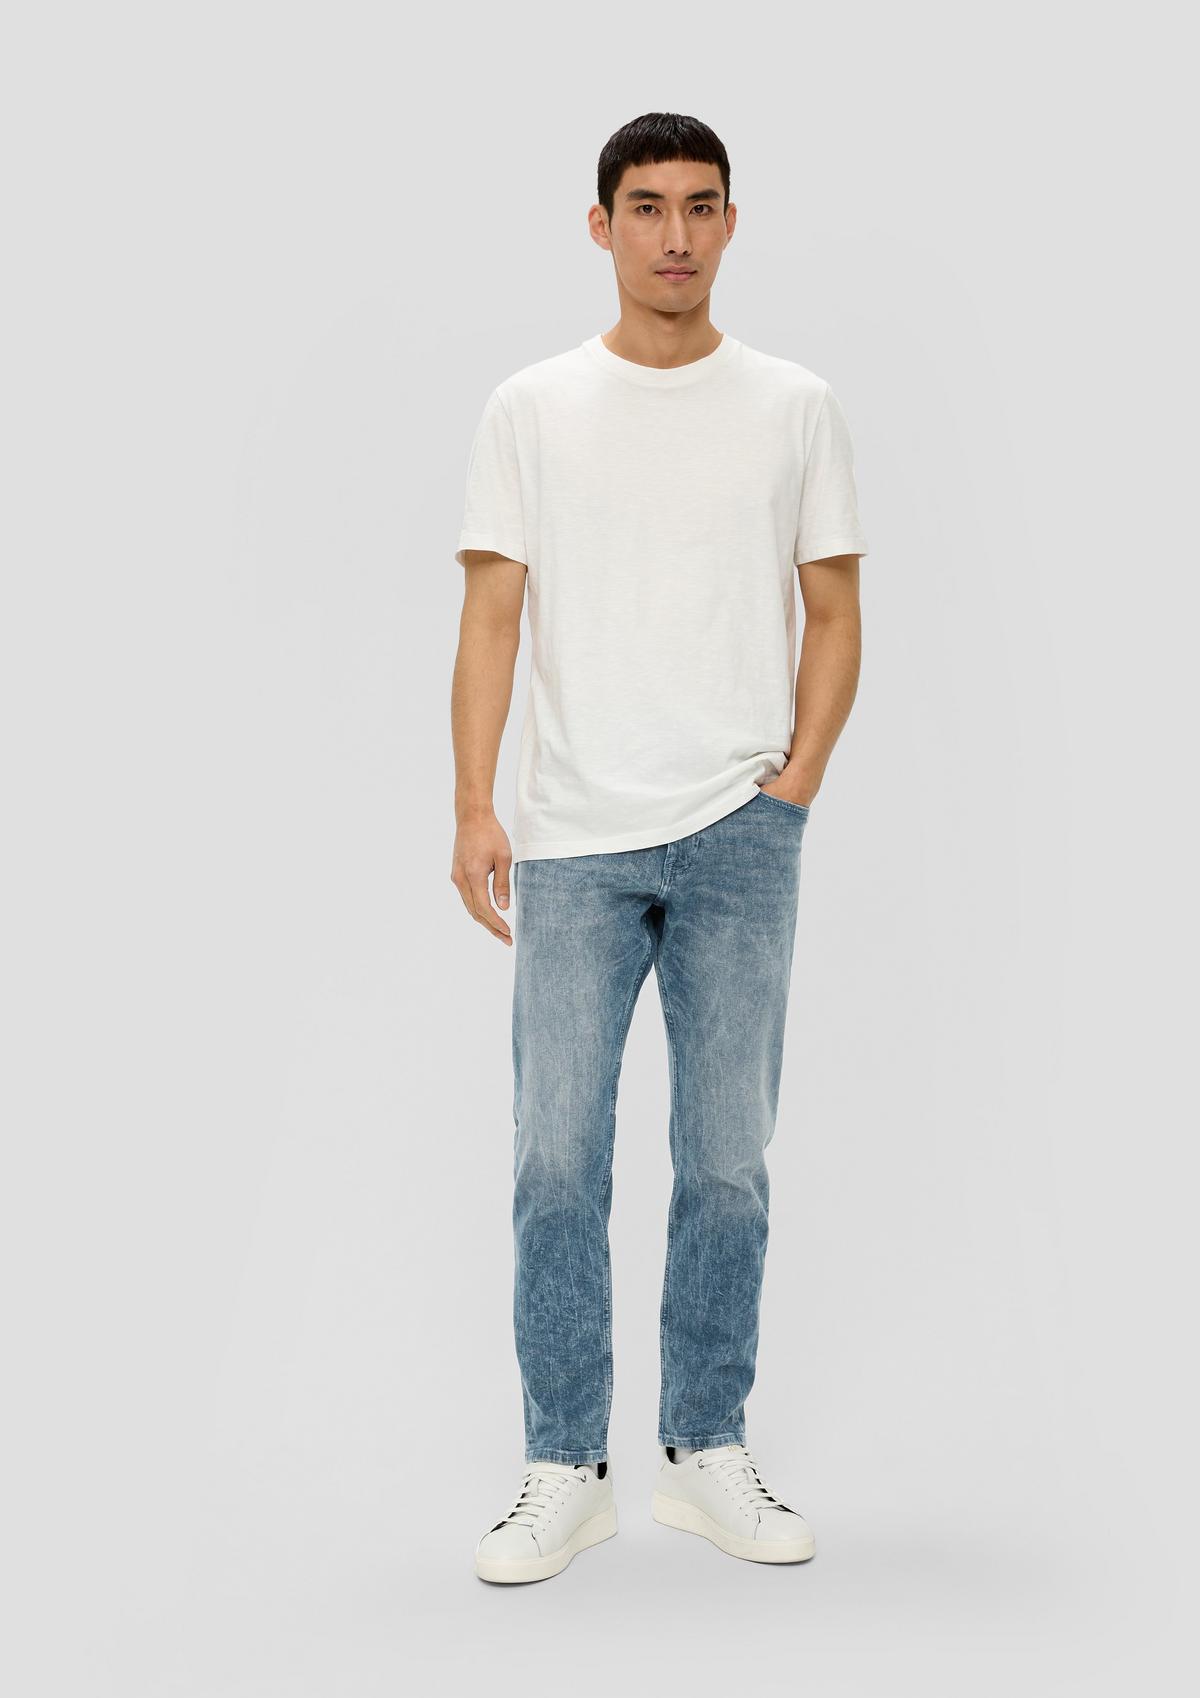 s.Oliver Jeans Mauro / regular fit / high rise / tapered leg